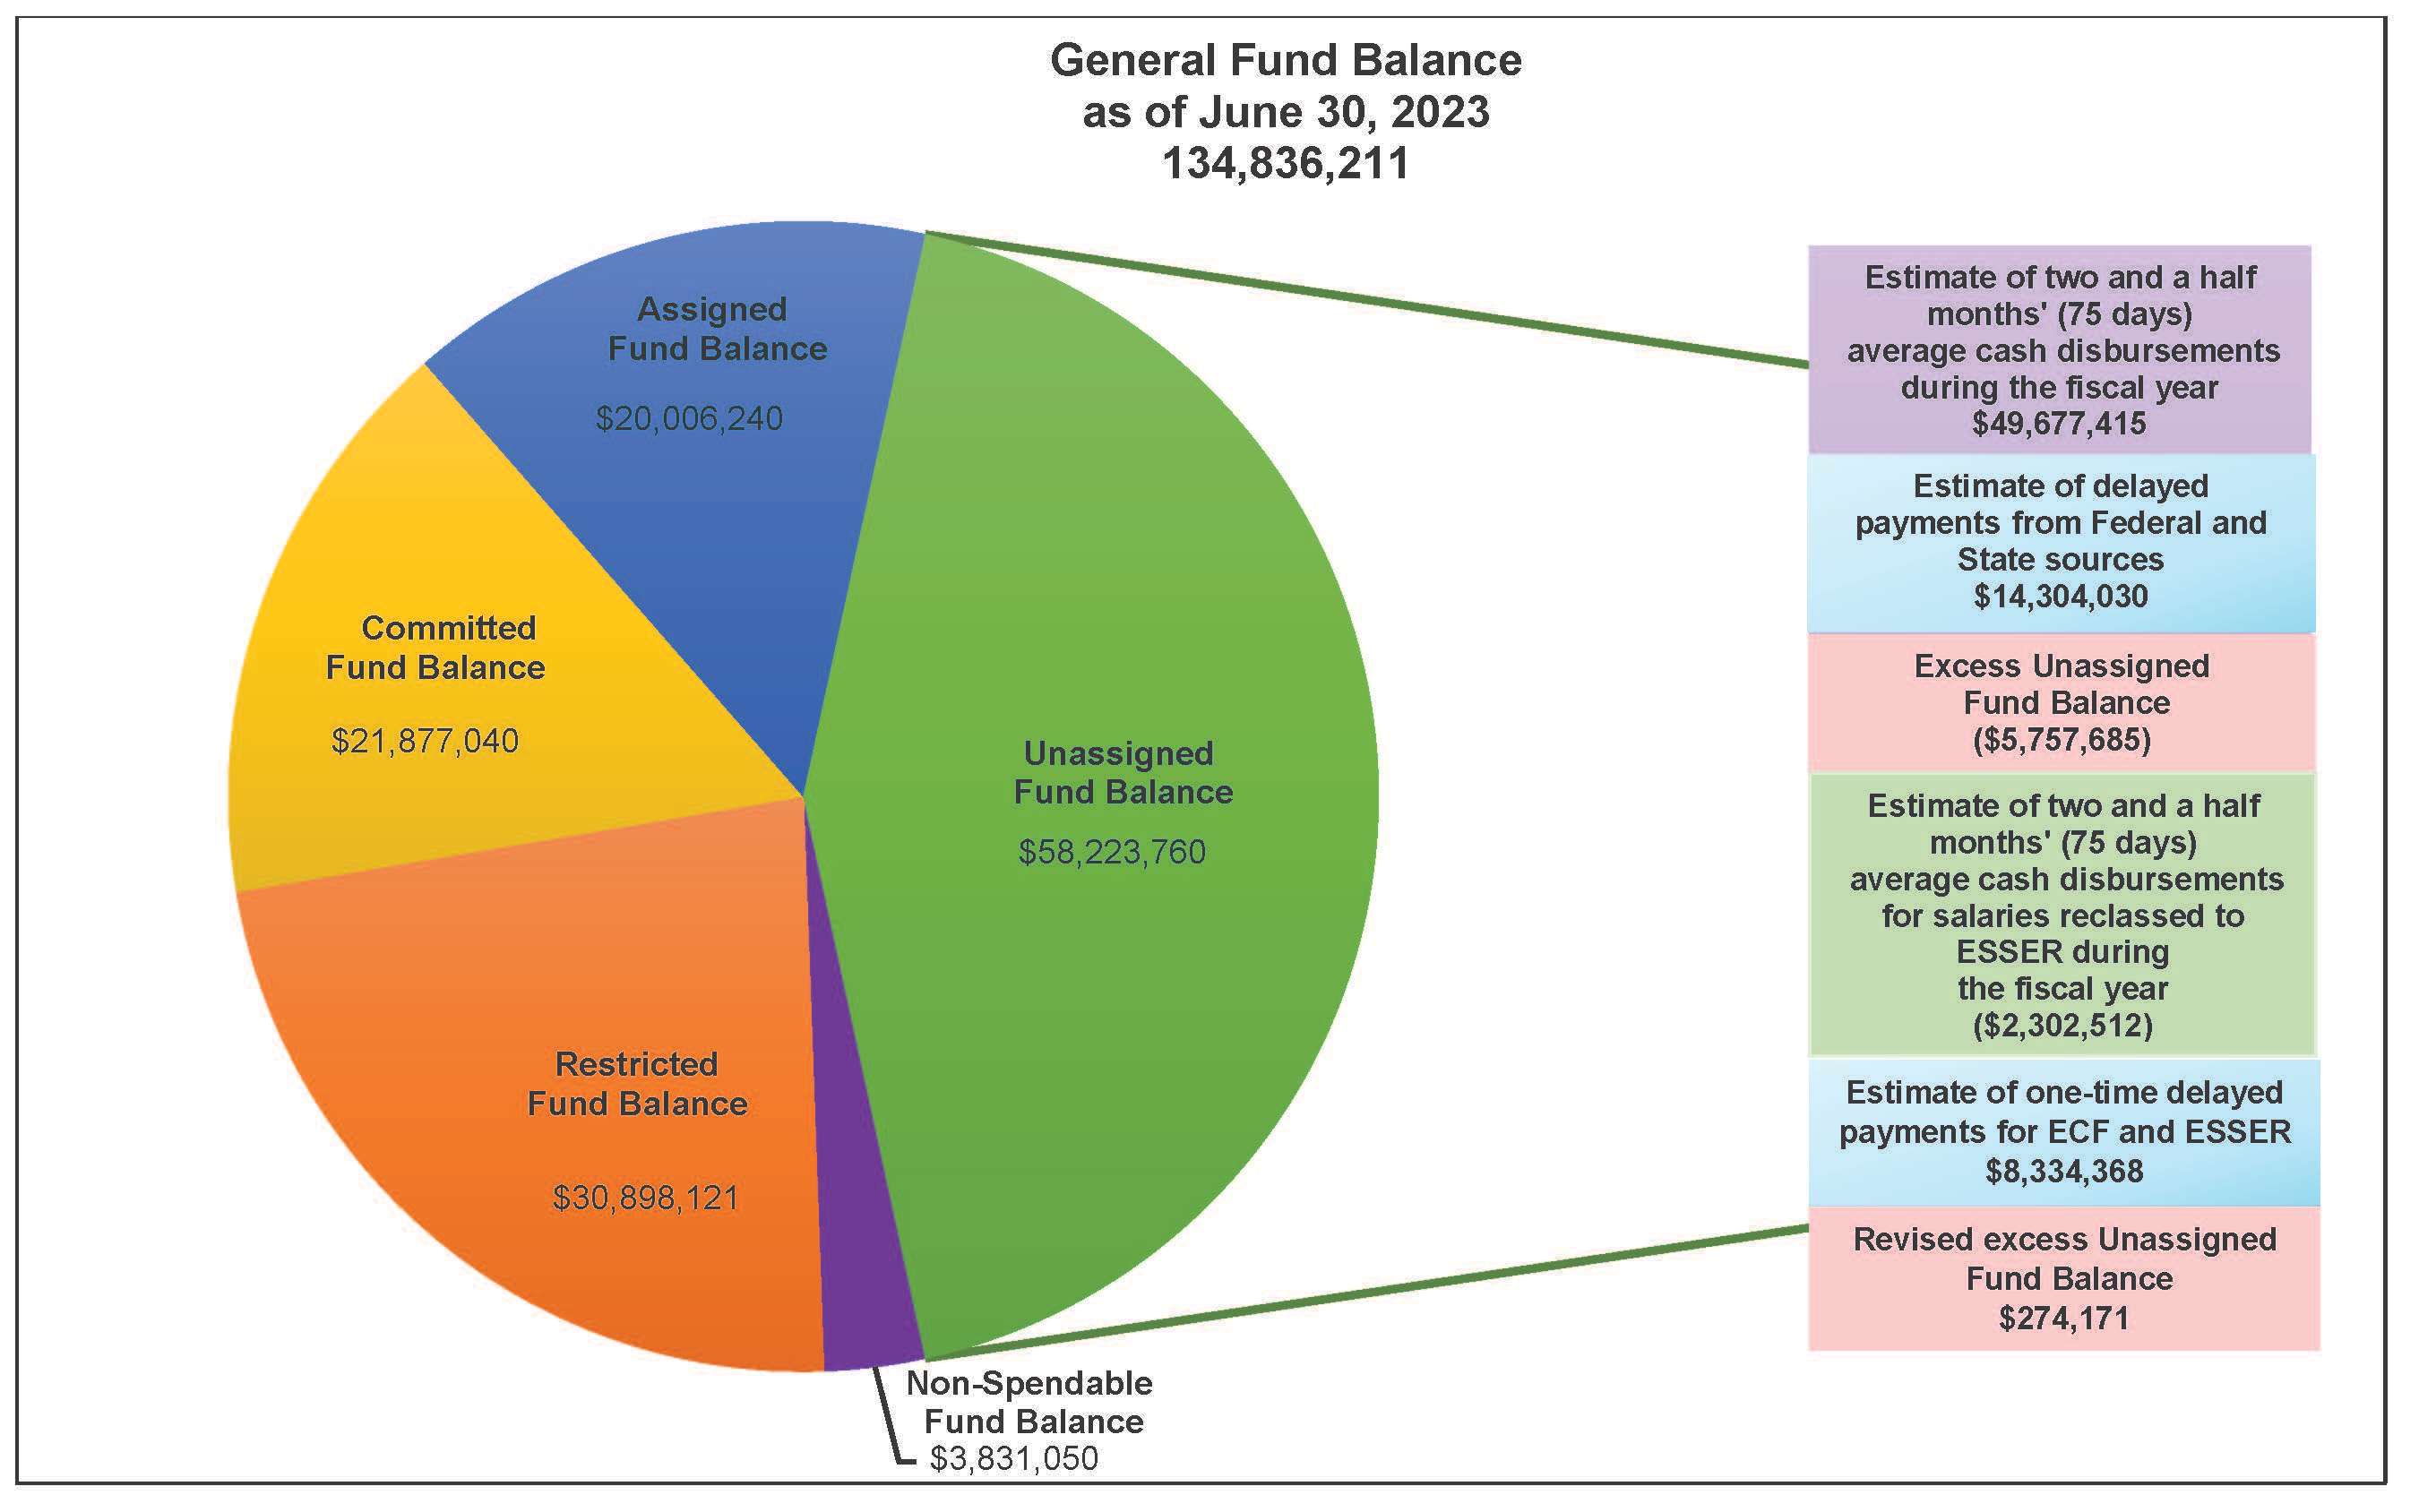 General Fund Balance as of June 30, 2022